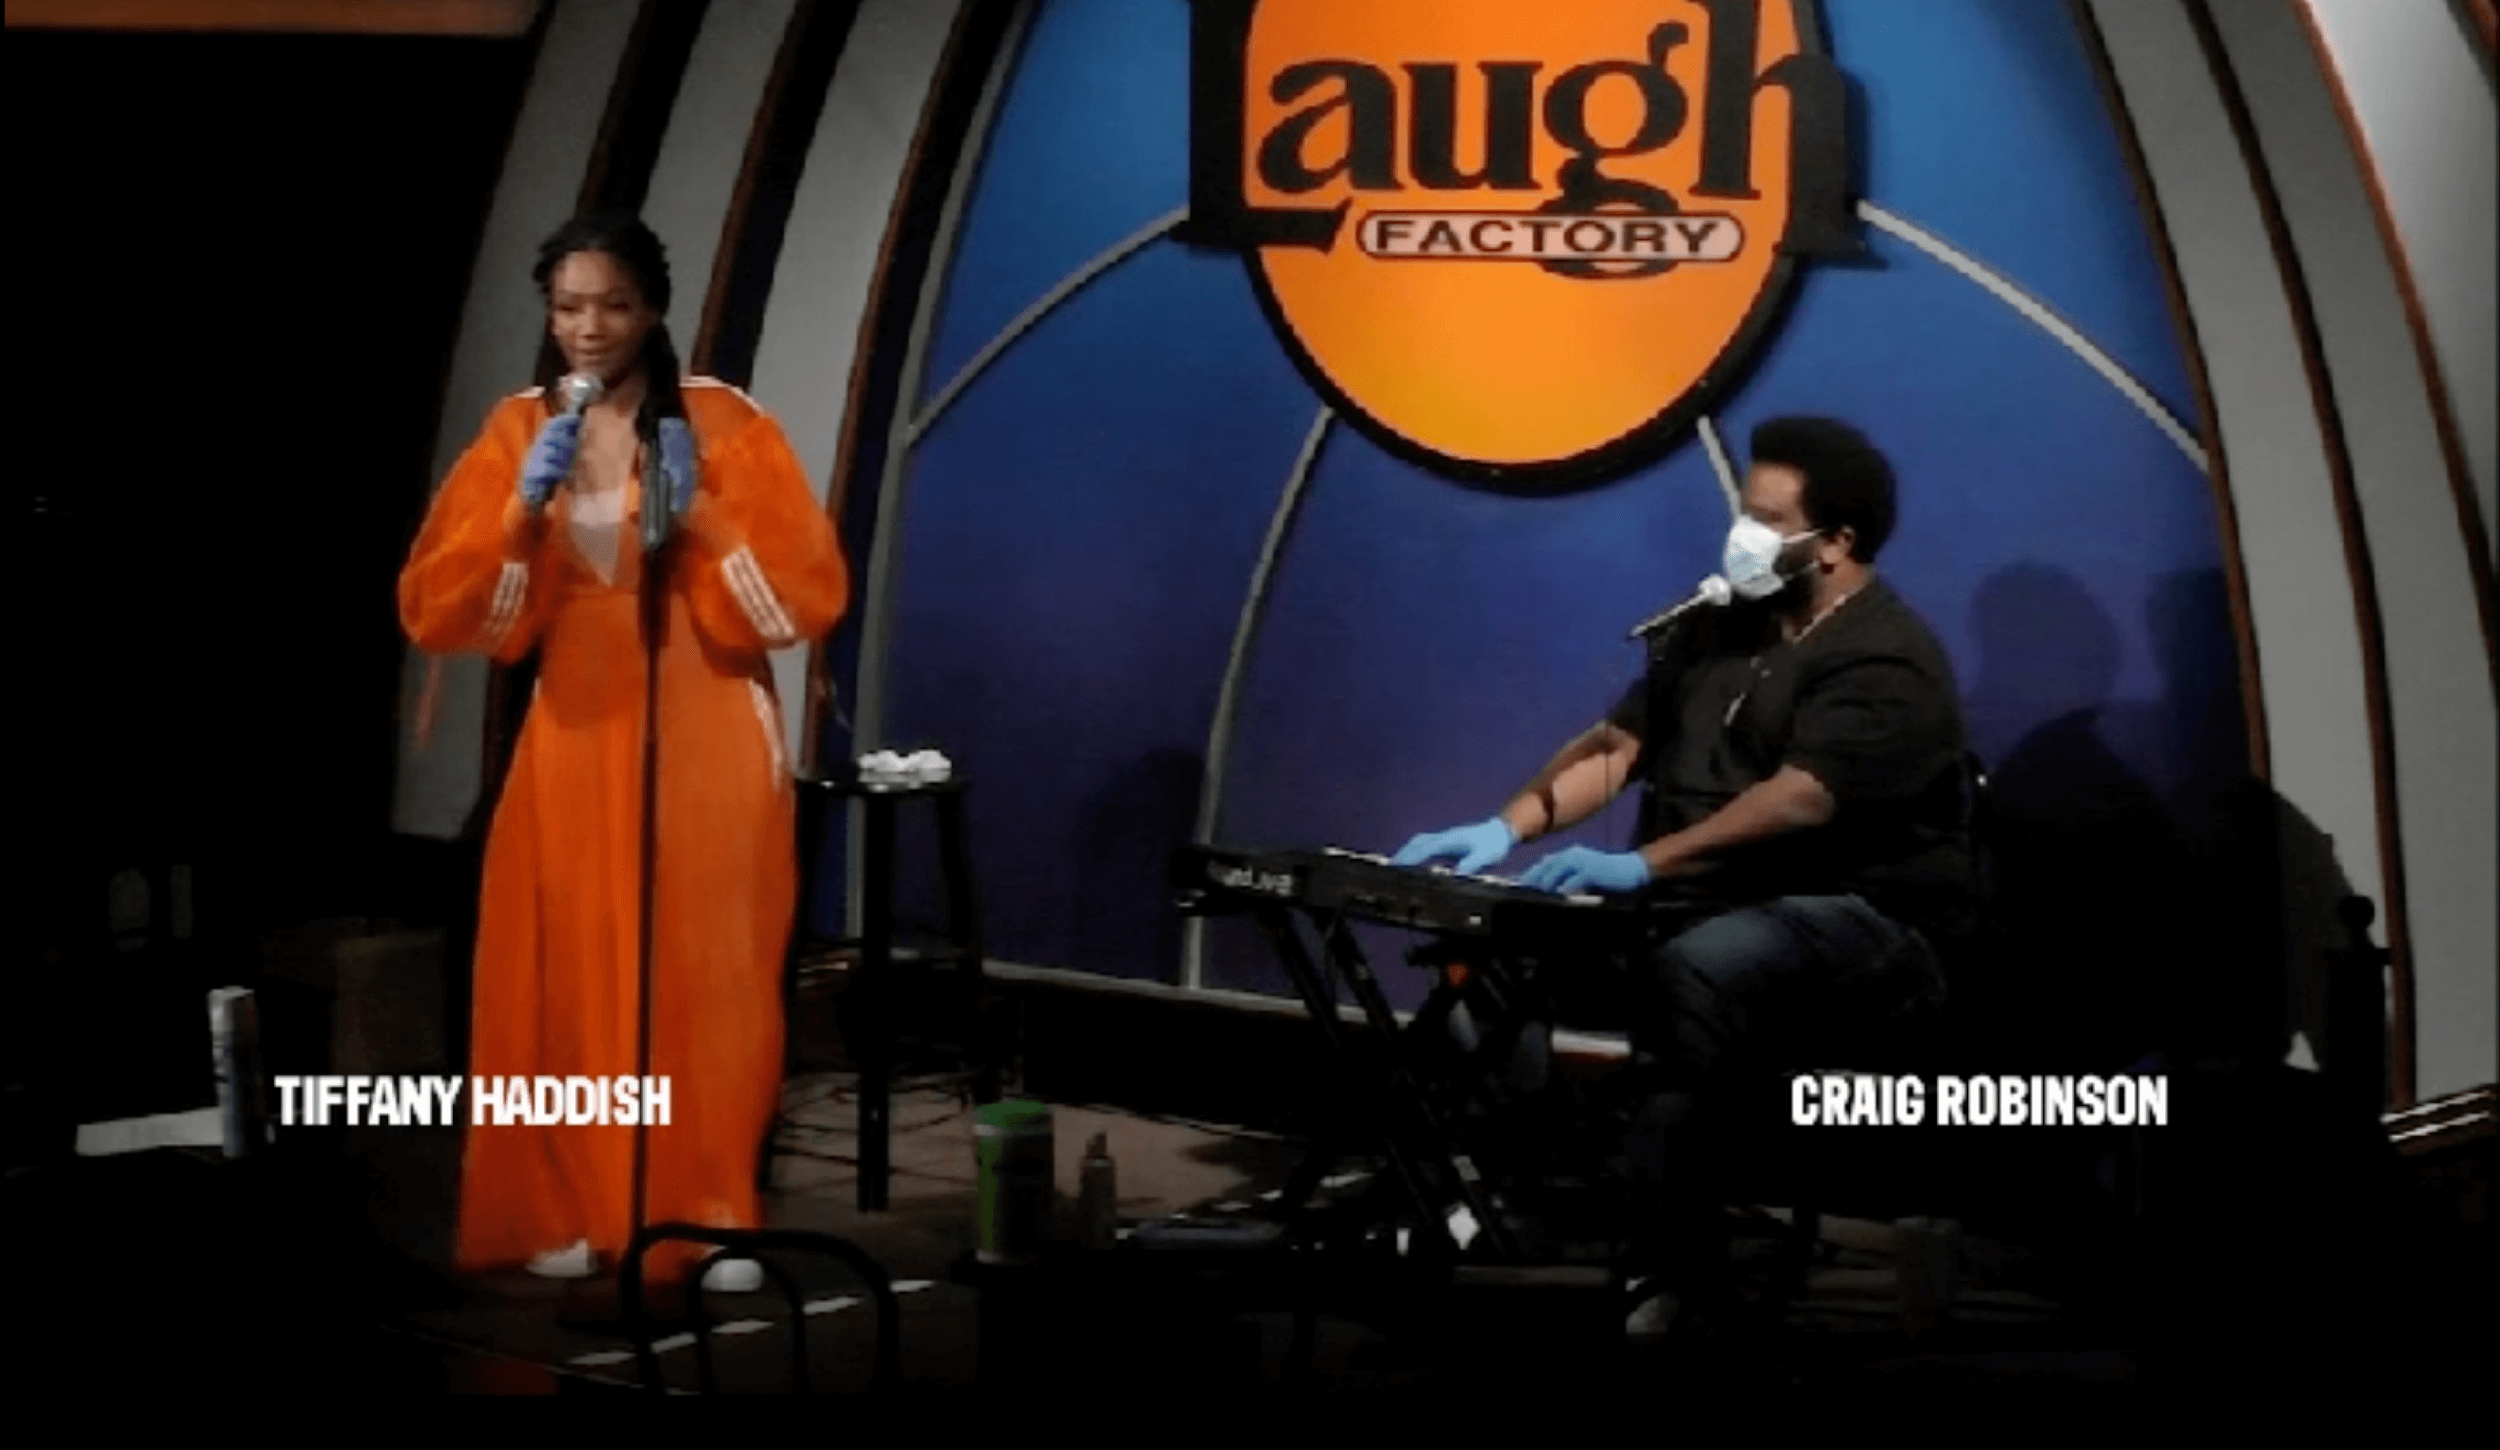 StandUp Comedy Videos Comedy Club Tickets Laugh Factory Network